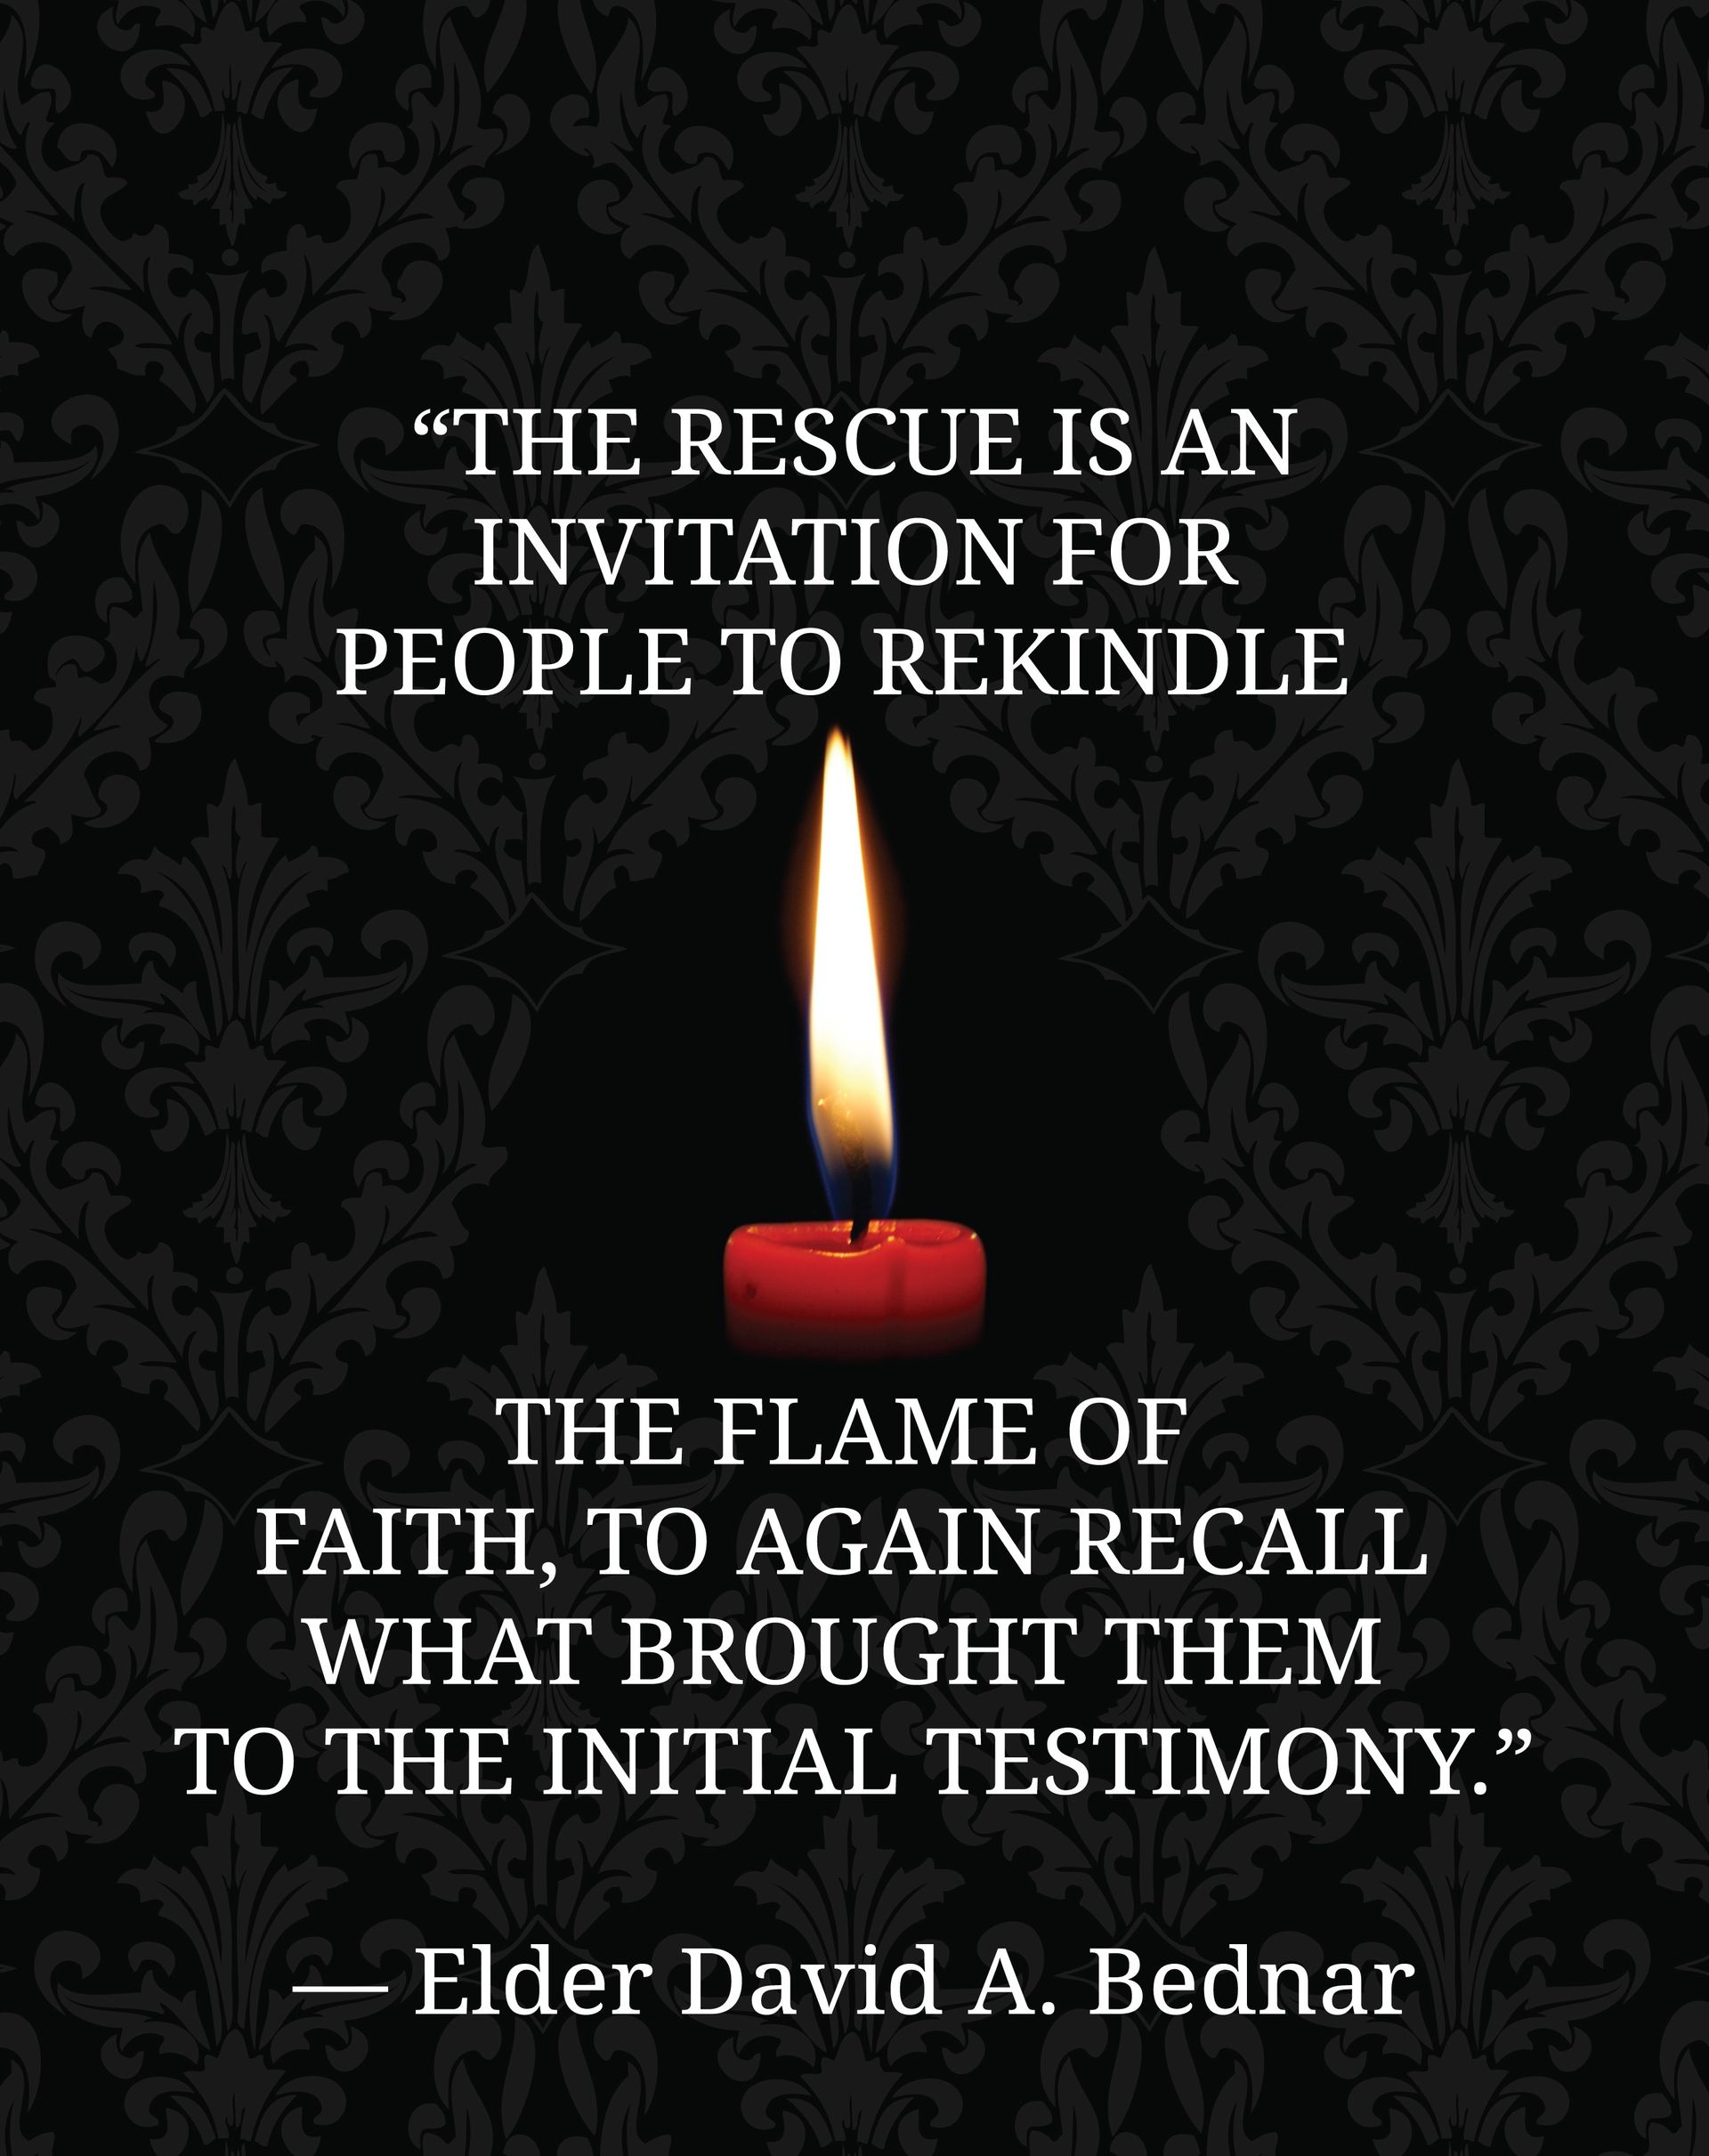 “The rescue is an invitation for people to rekindle the flame of faith, to again recall what brought them to the initial testimony.”—Elder David A. Bednar, “Rekindling the Flame of Faith” © undefined ipCode 1.